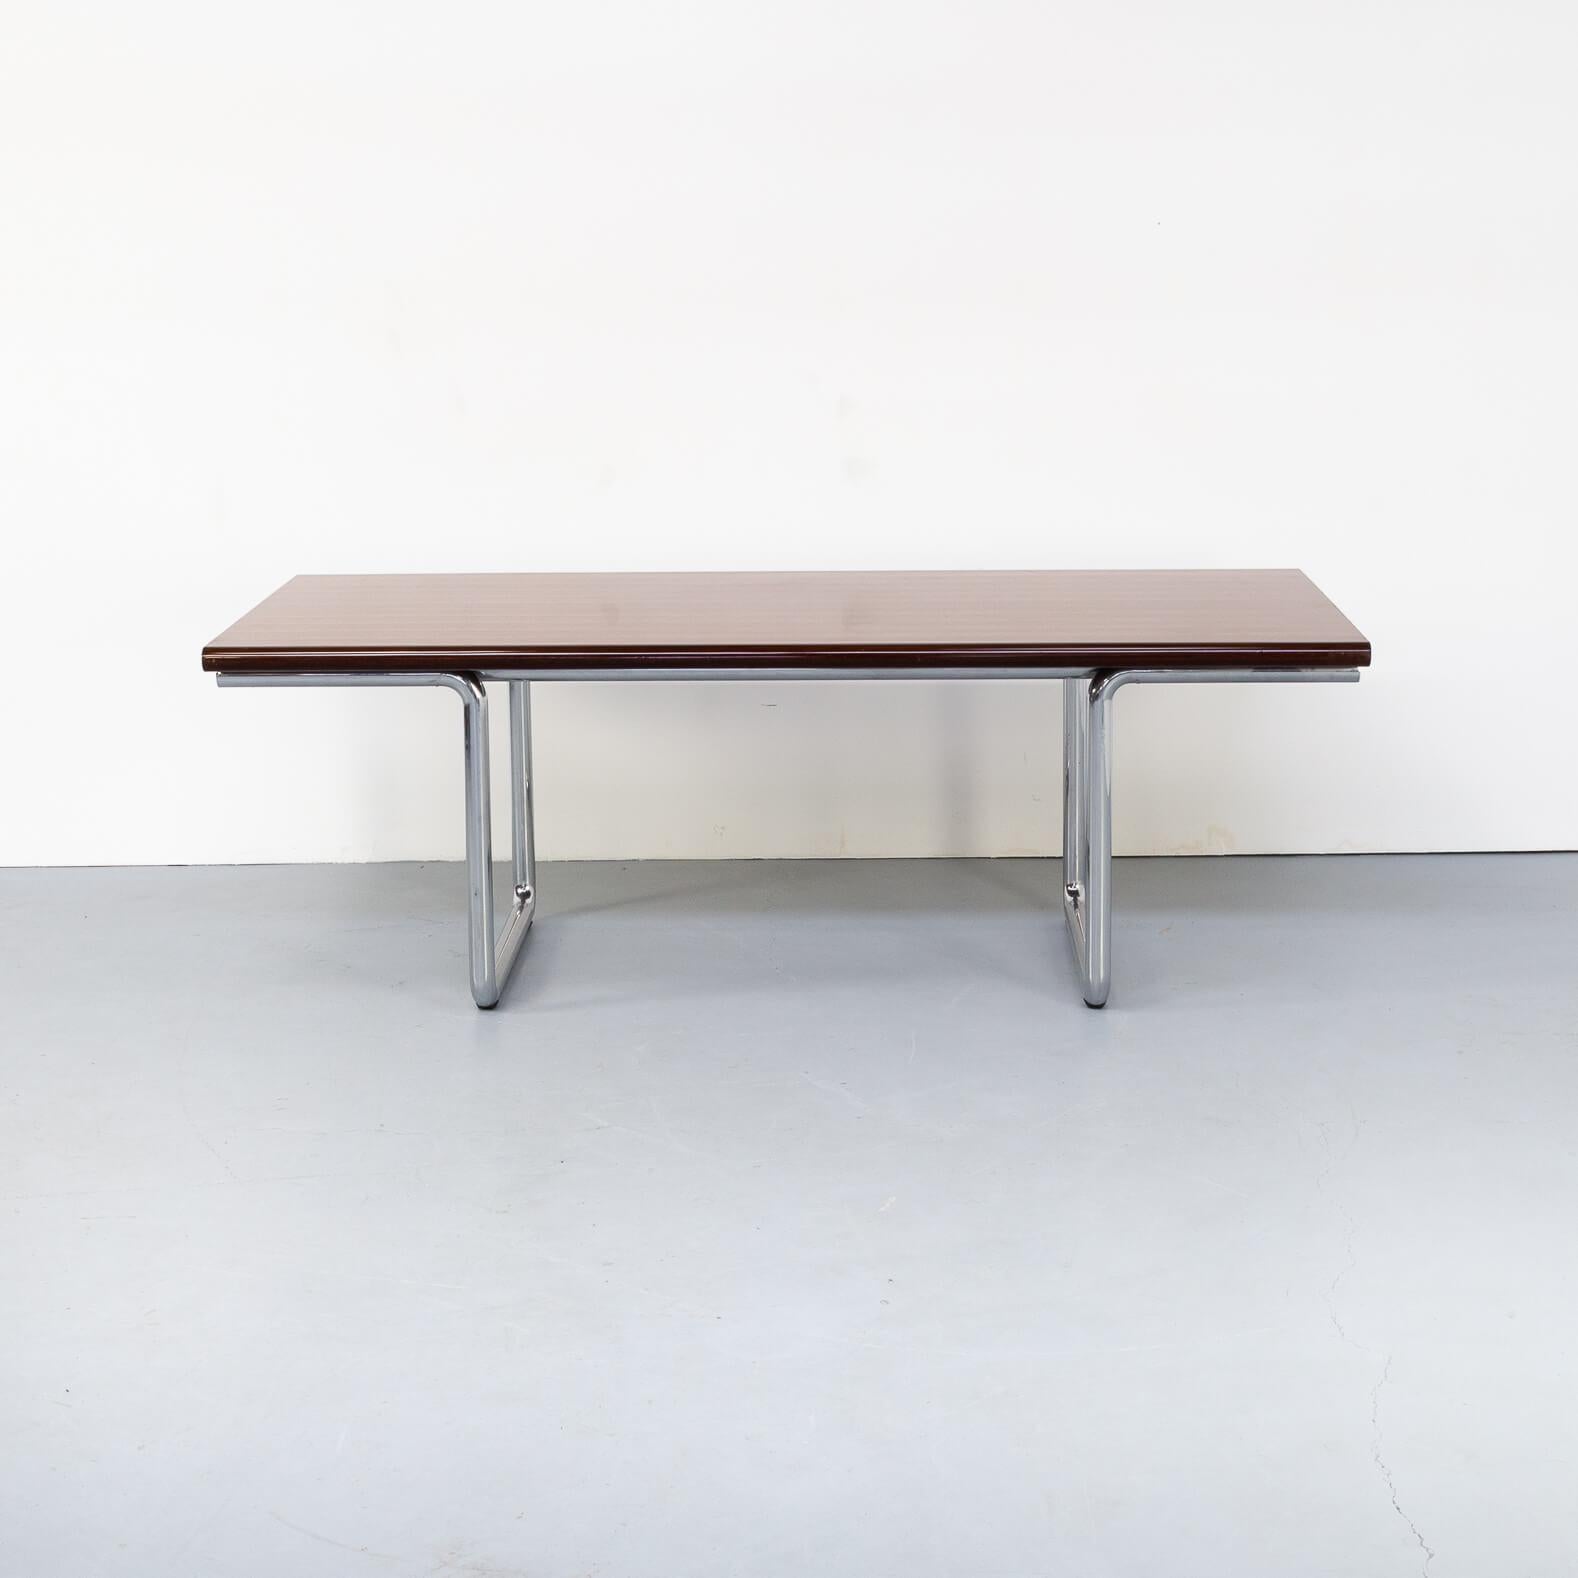 1970s Bauhaus Style Executive Desk Table In Good Condition For Sale In Amstelveen, Noord